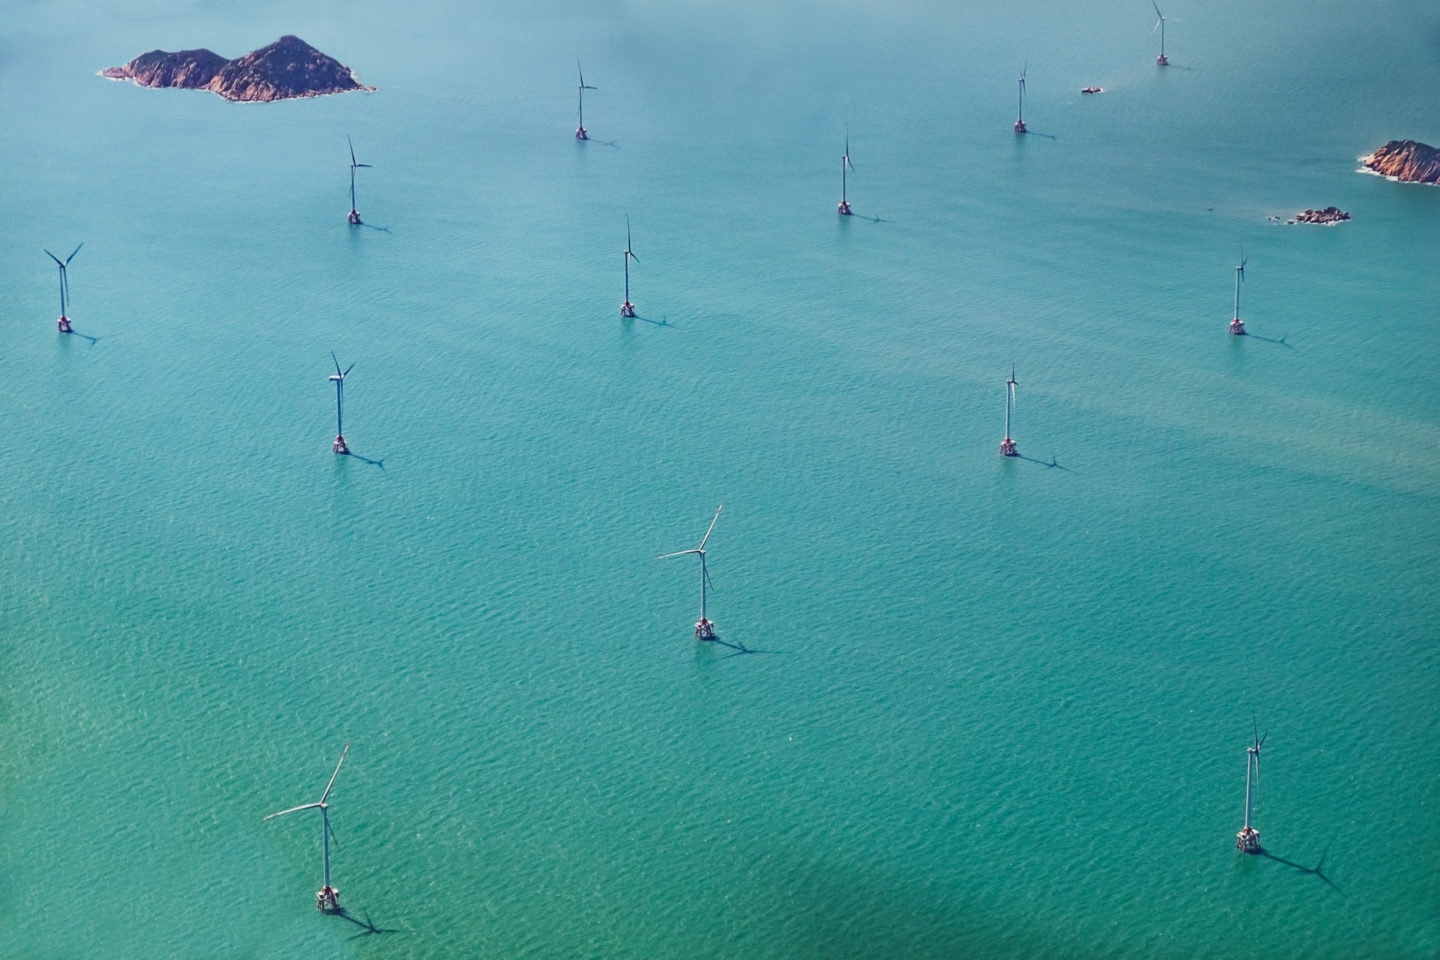 Aerial view of offshore wind farms, South China Sea, Hong Kong